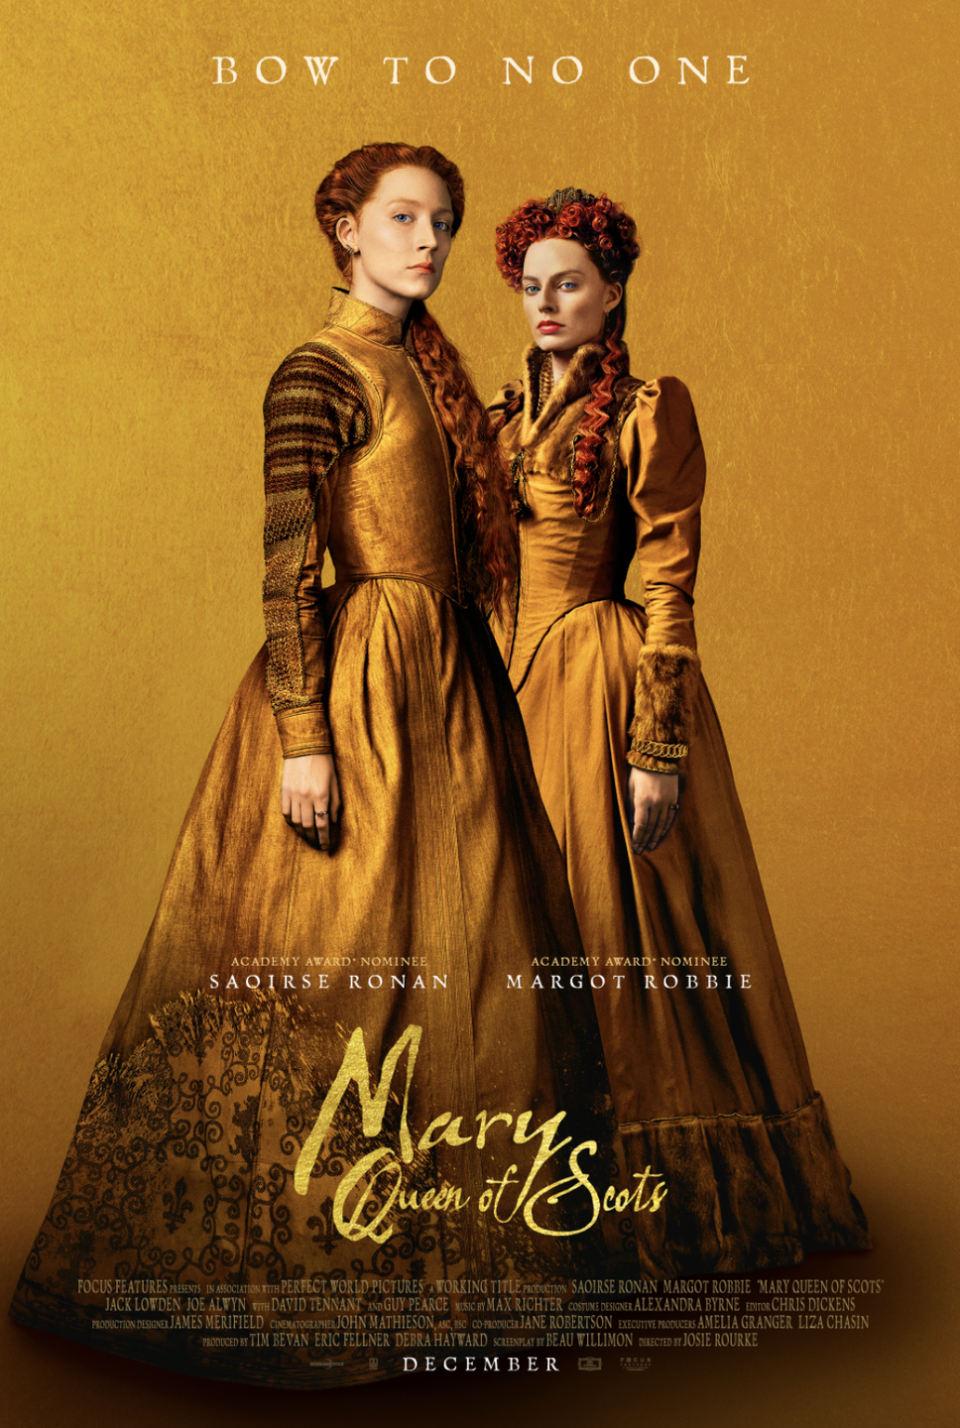 <p>Who doesn't love drama when it comes to the monarchy? In this royal flick, we witness the real-life rivalry between Queen Elizabeth I (Margot Robbie) and Mary, Queen of Scots (<a href="https://www.goodhousekeeping.com/life/entertainment/a30505163/how-to-pronounce-saoirse-ronan/" rel="nofollow noopener" target="_blank" data-ylk="slk:Saoirse Ronan" class="link ">Saoirse Ronan</a>) as they battle to rule England and Scotland under one throne. </p><p><a class="link " href="https://www.amazon.com/Mary-Queen-Scots-Saoirse-Ronan/dp/B07L38J6MW?tag=syn-yahoo-20&ascsubtag=%5Bartid%7C10055.g.40299603%5Bsrc%7Cyahoo-us" rel="nofollow noopener" target="_blank" data-ylk="slk:Amazon">Amazon</a> </p><p><a class="link " href="https://go.redirectingat.com?id=74968X1596630&url=https%3A%2F%2Ftv.apple.com%2Fus%2Fmovie%2Fmary-queen-of-scots-2018%2Fumc.cmc.fh9awgg1te2jmfjm856ohn1n%3Faction%3Dplay&sref=https%3A%2F%2Fwww.goodhousekeeping.com%2Flife%2Fentertainment%2Fg40299603%2Fbest-historical-movies%2F" rel="nofollow noopener" target="_blank" data-ylk="slk:Apple TV">Apple TV</a></p>